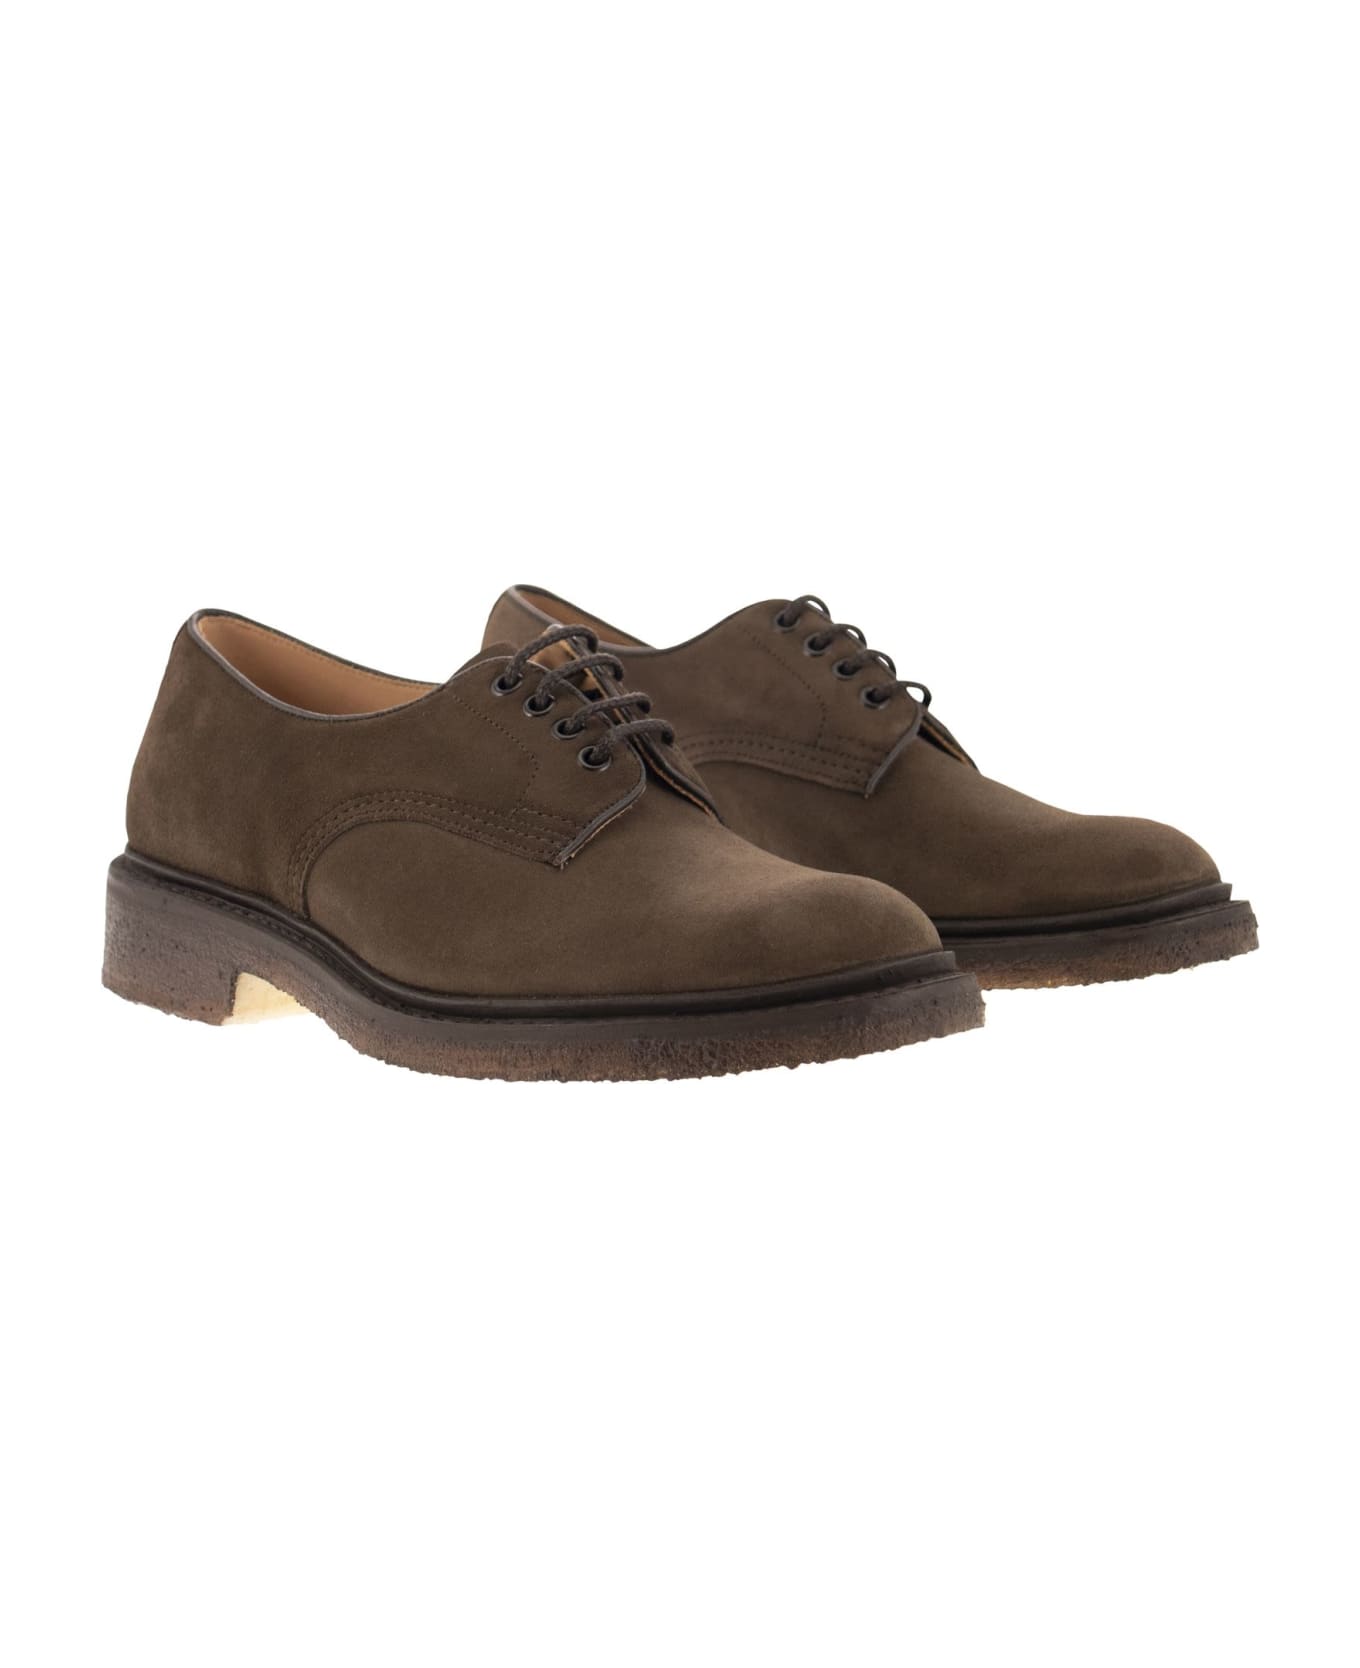 Tricker's Daniel - Suede Leather Lace-up - Brown ローファー＆デッキシューズ